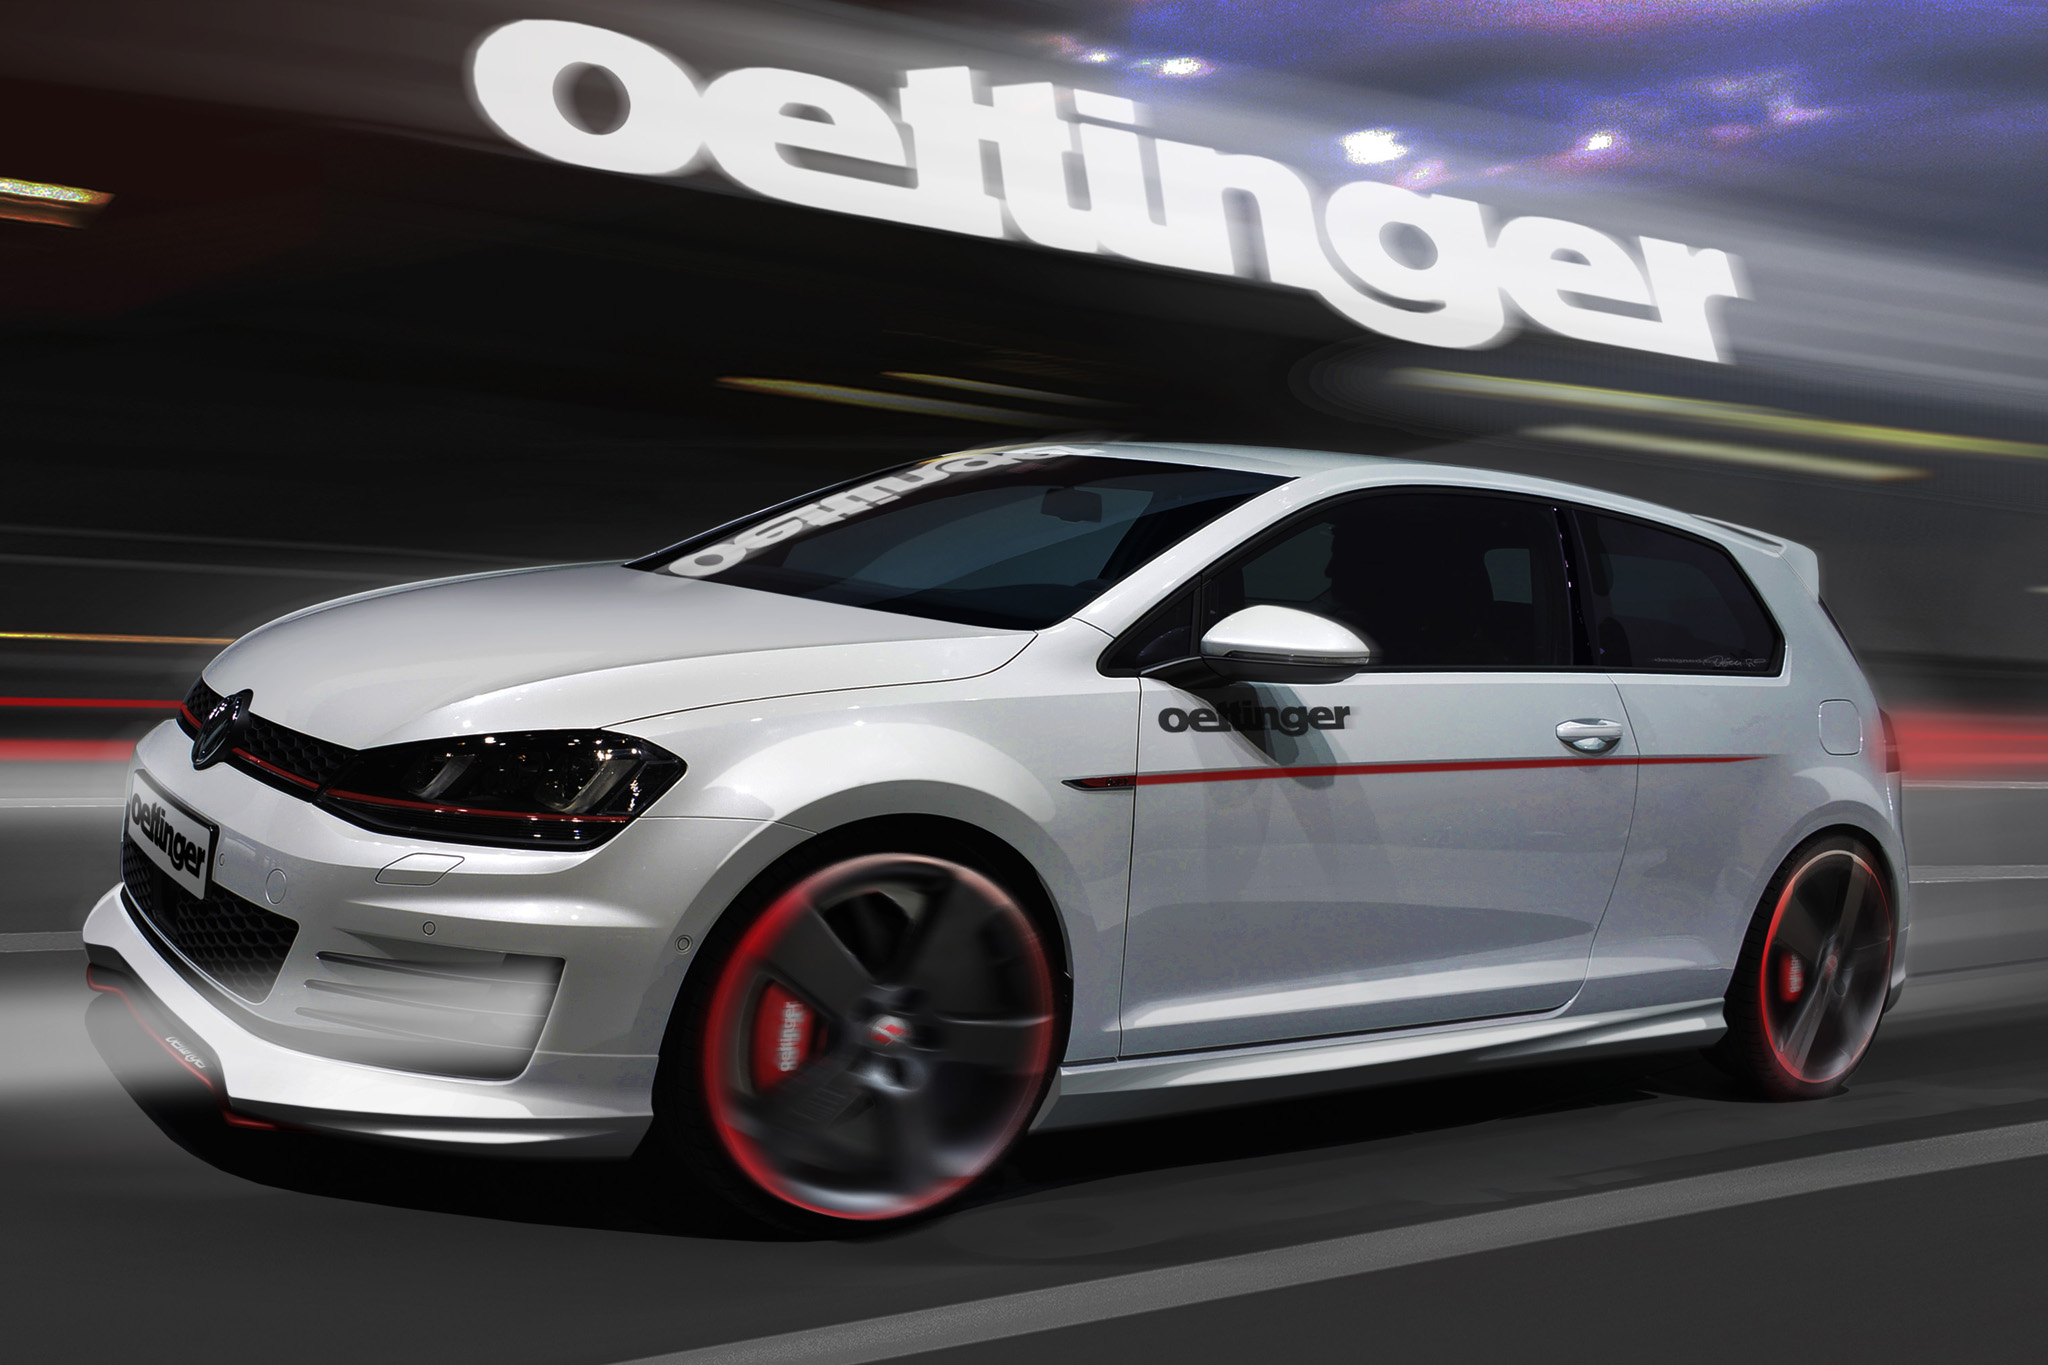 Volkswagen Golf Gti Mk7 Tuned By Oettinger Photo Gallery